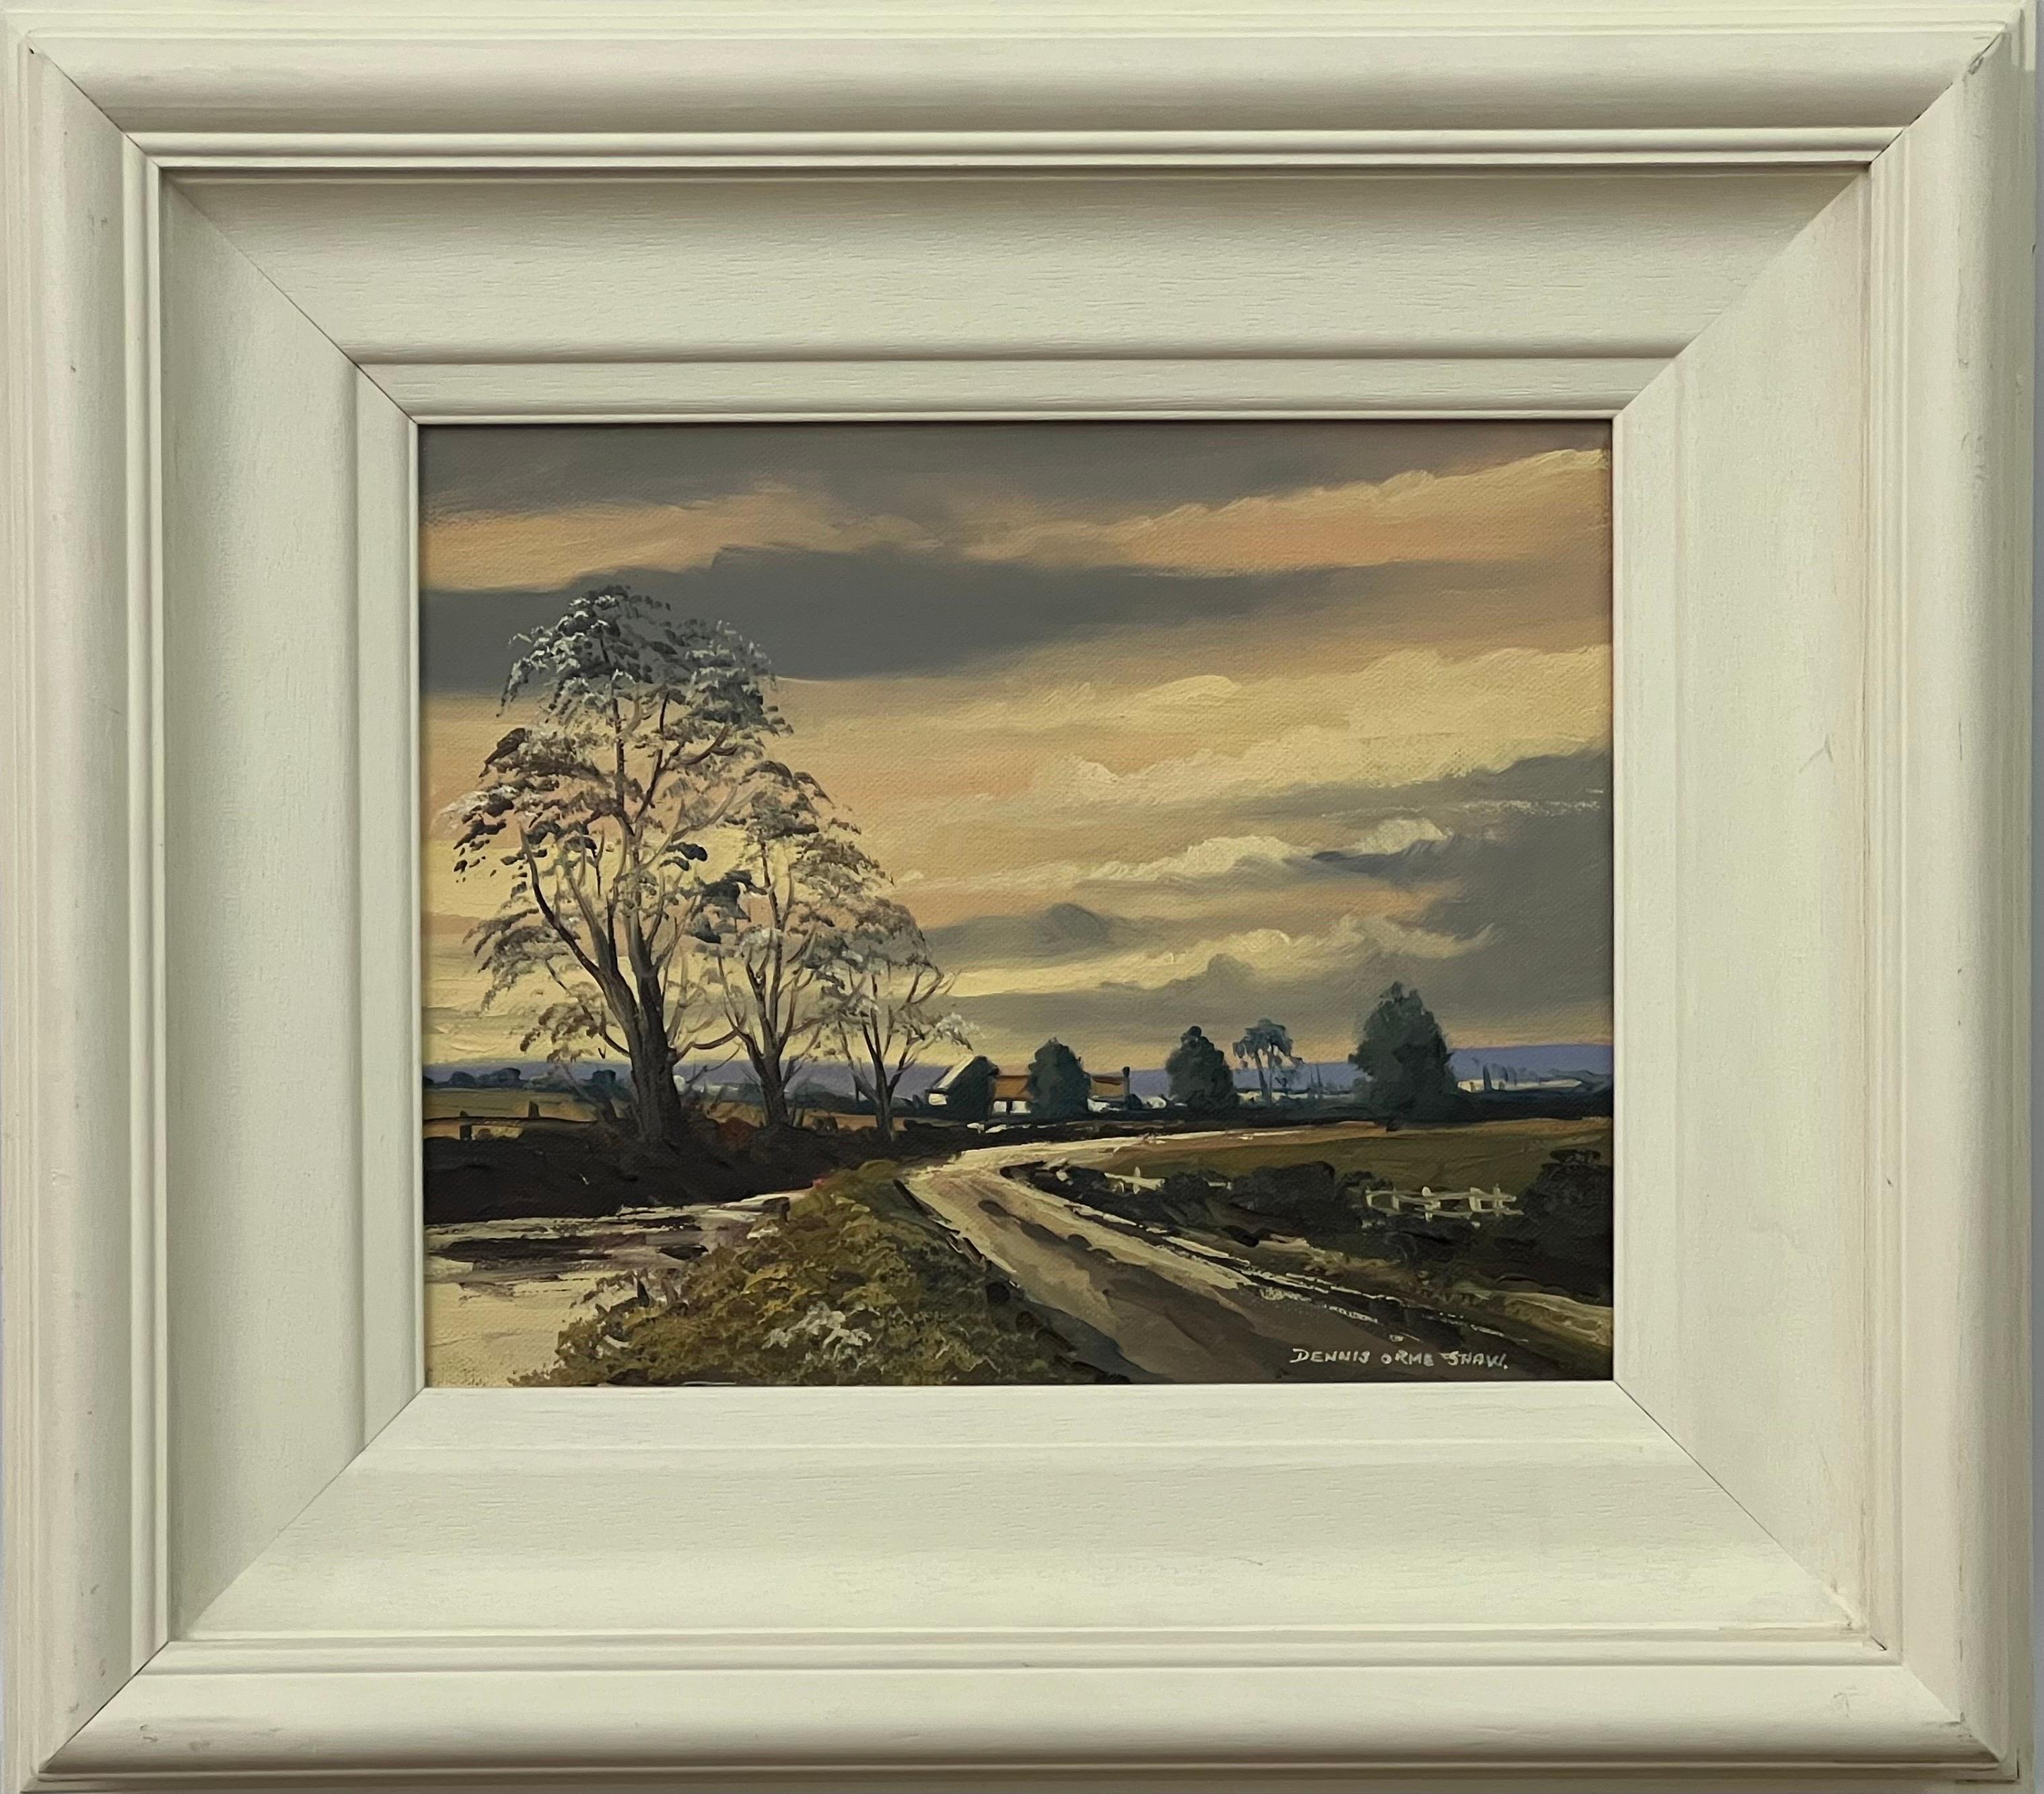 Dennis Orme Shaw Figurative Painting - Sunset in Ireland Countryside - Original Oil Painting by Northern Irish Artist